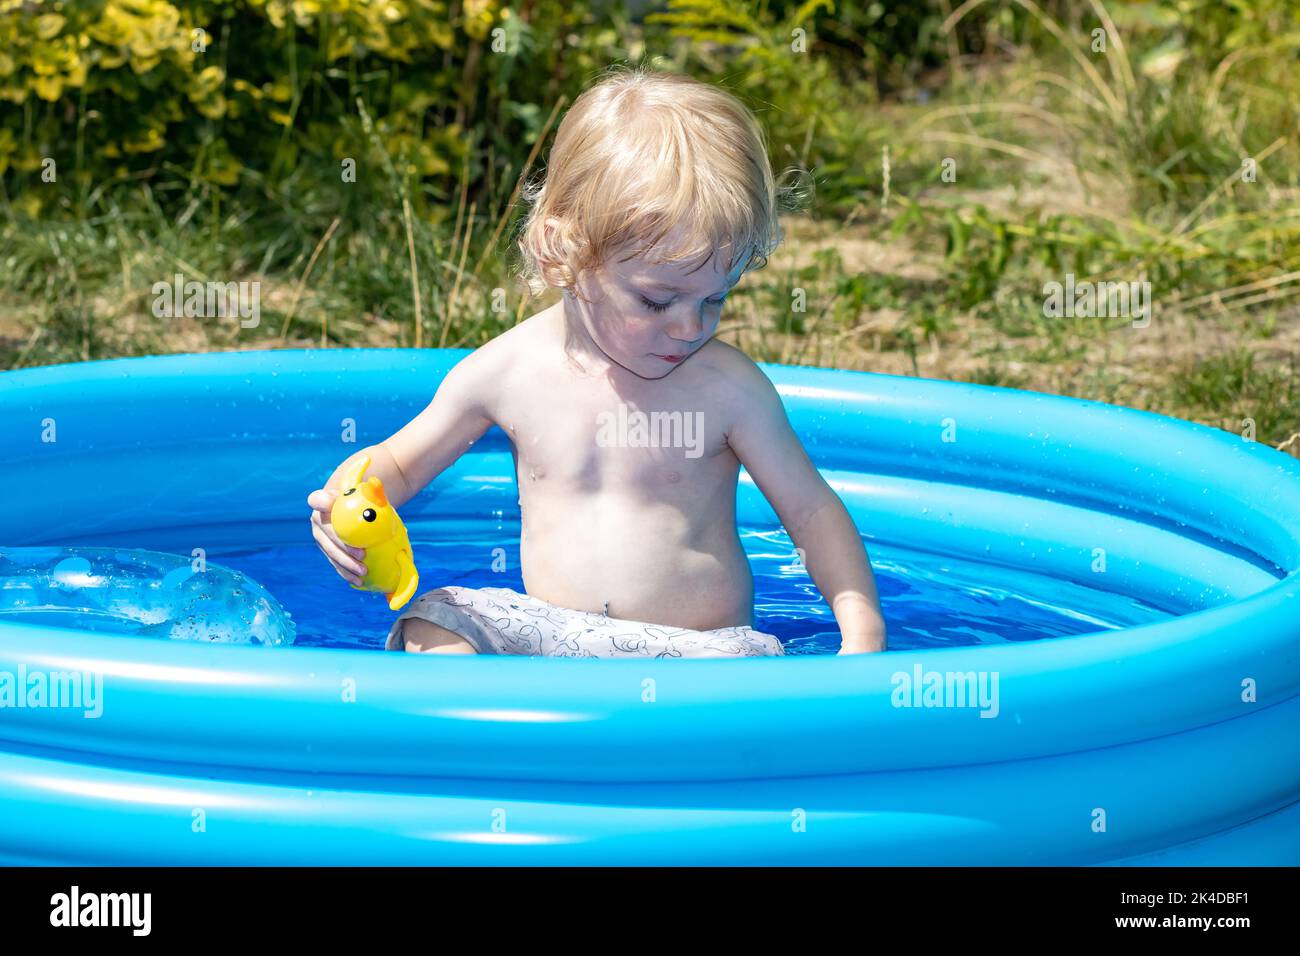 A little boy is playing in the inflatable pool in the summer garden Stock Photo